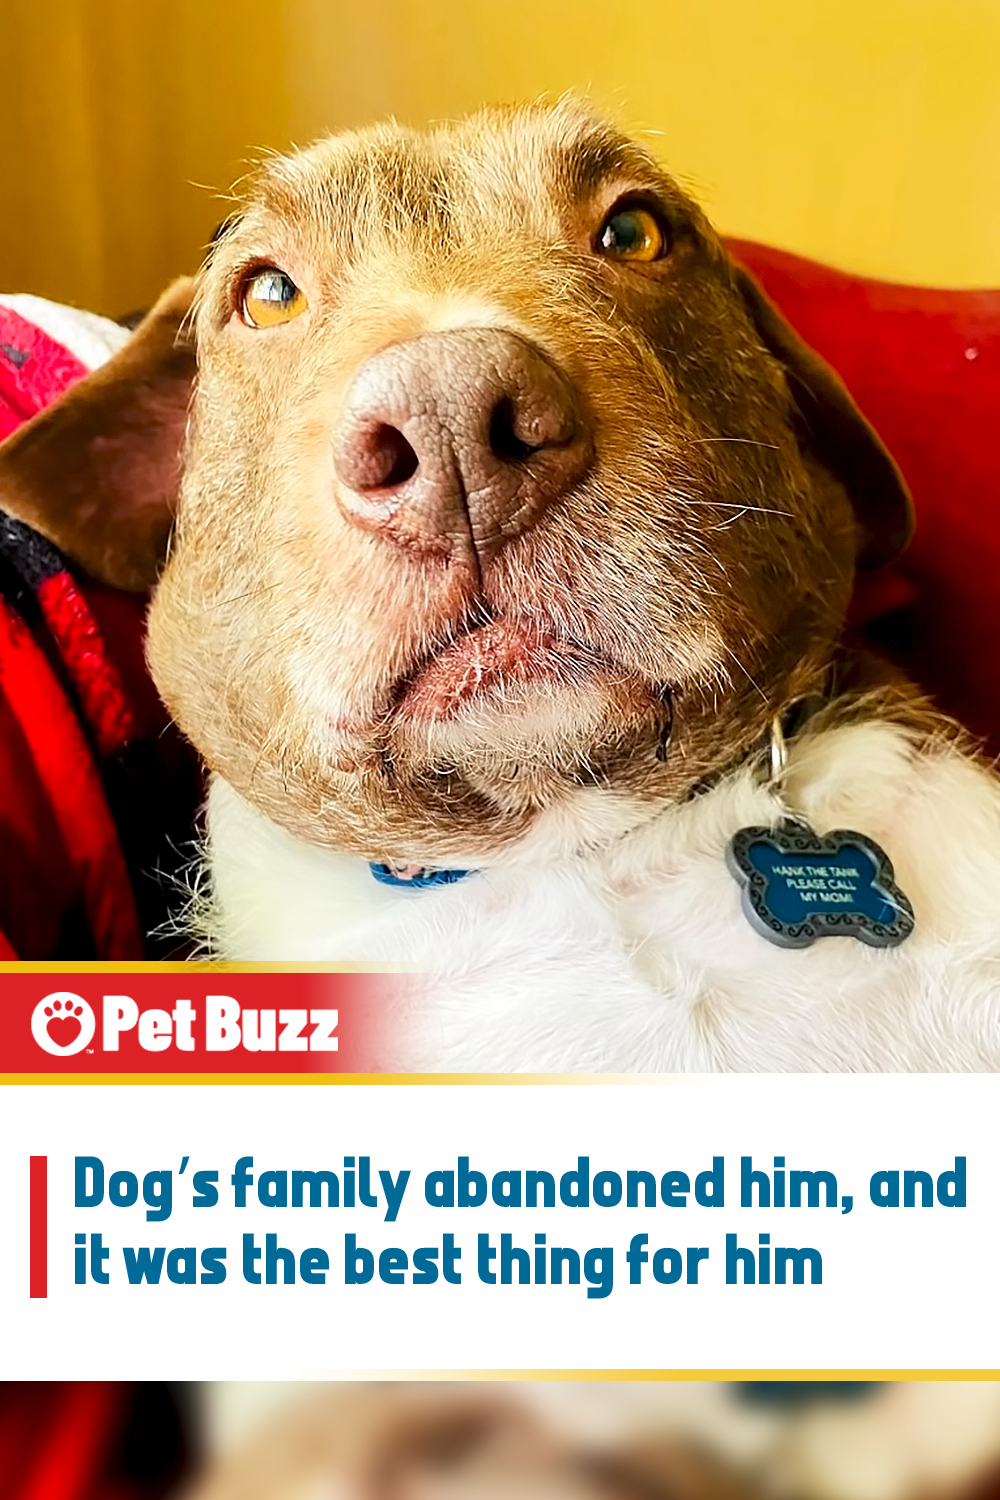 Dog’s family abandoned him, and it was the best thing for him